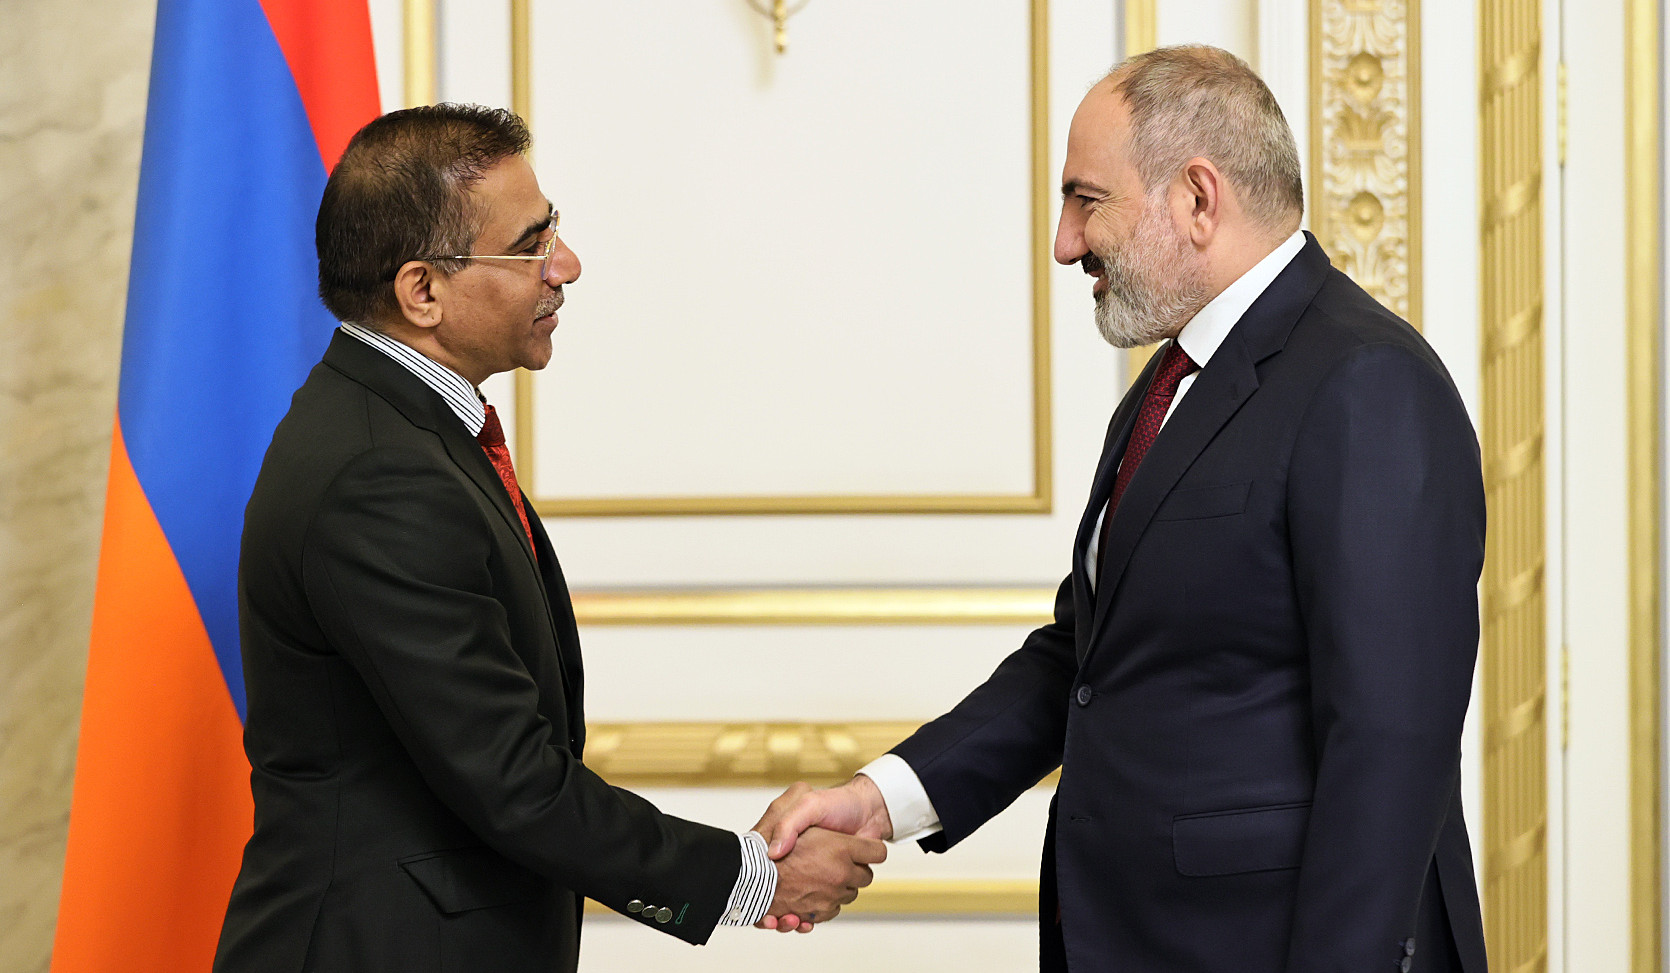 Ambassador of India to Armenia holds farewell meeting with the Prime Minister